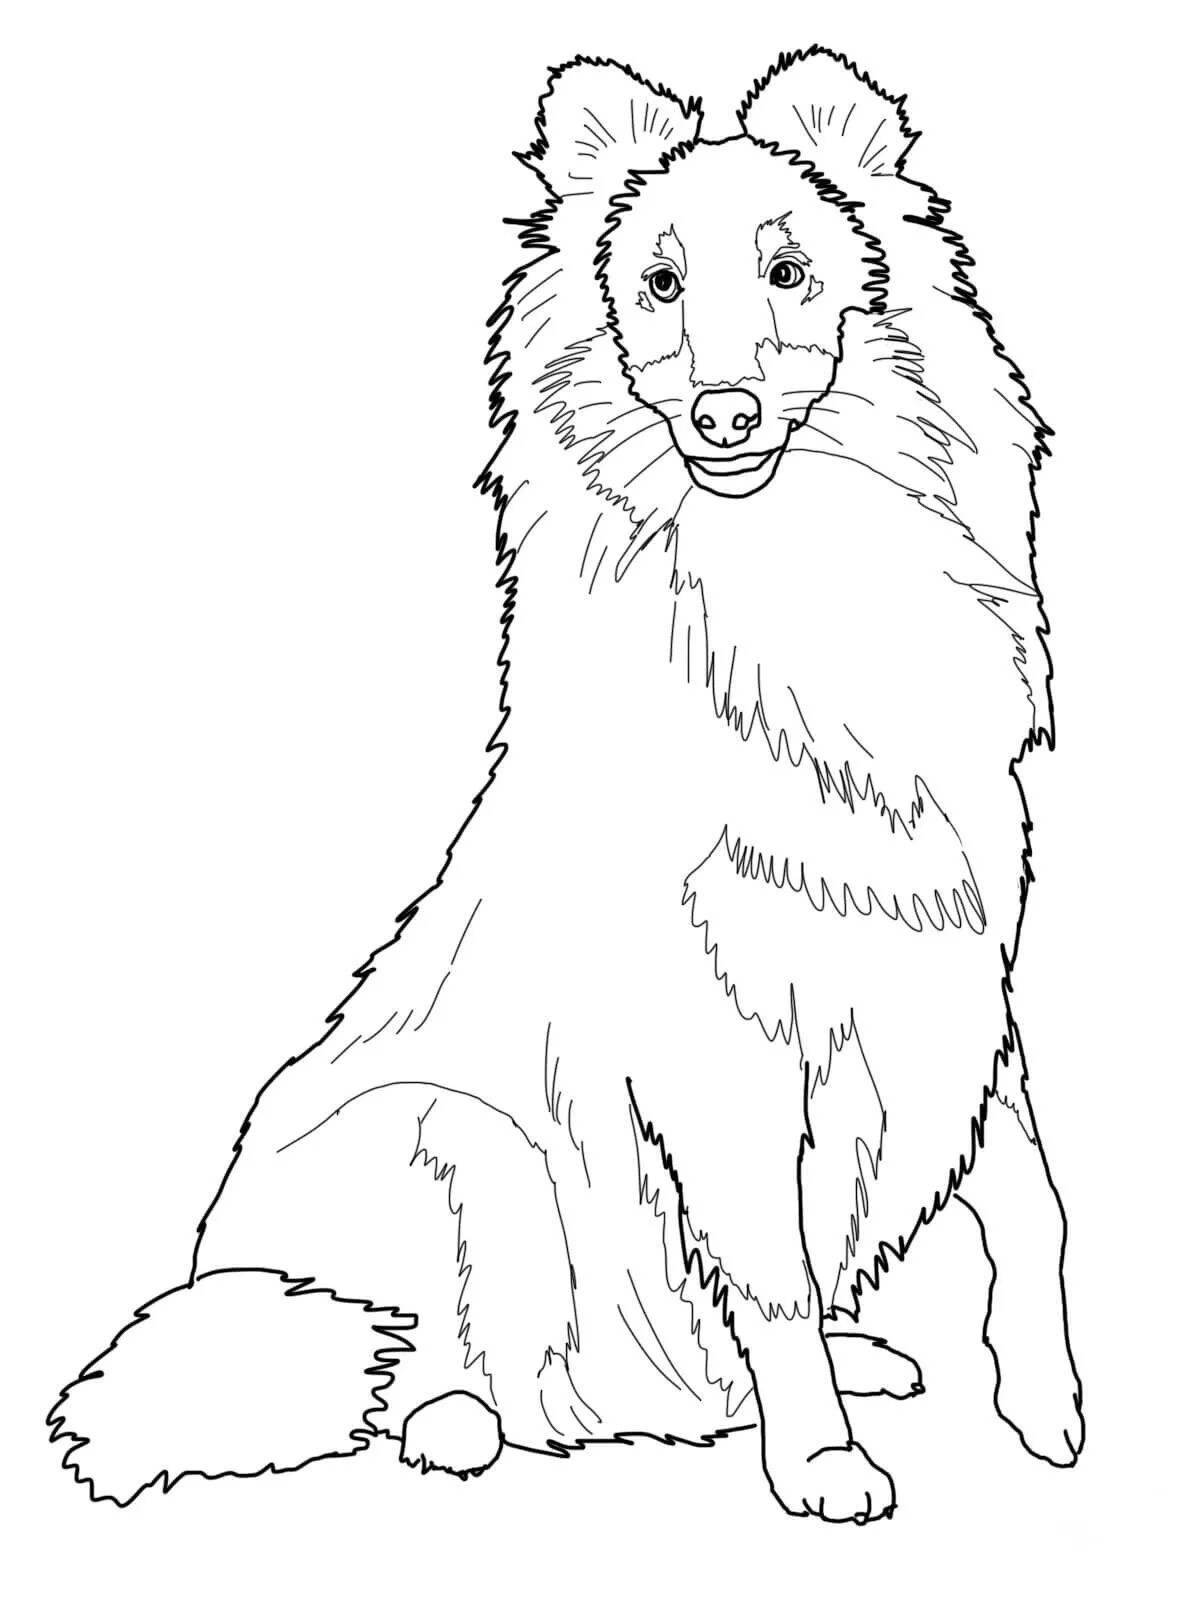 Collie live coloring page